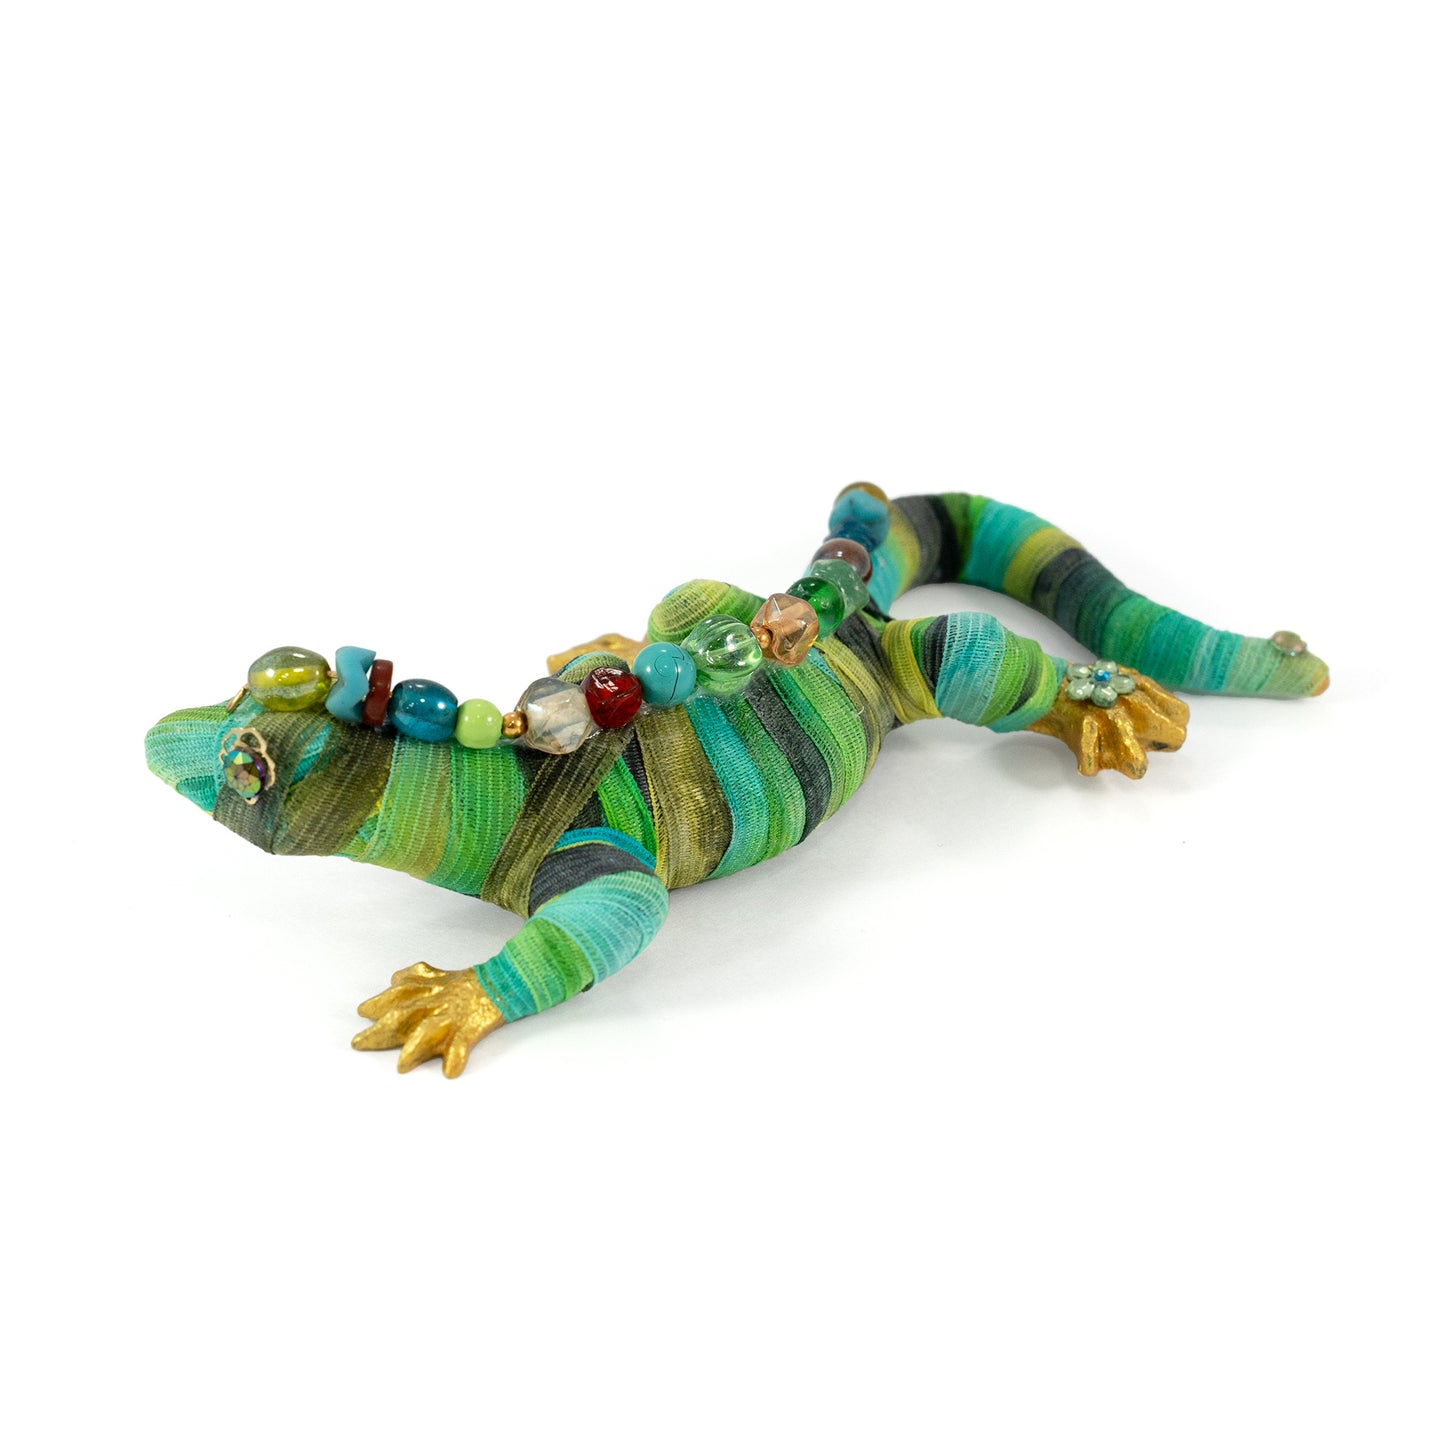 Green and Gold Ribbon Yarn-wrapped Lizard Sculpture with Gems